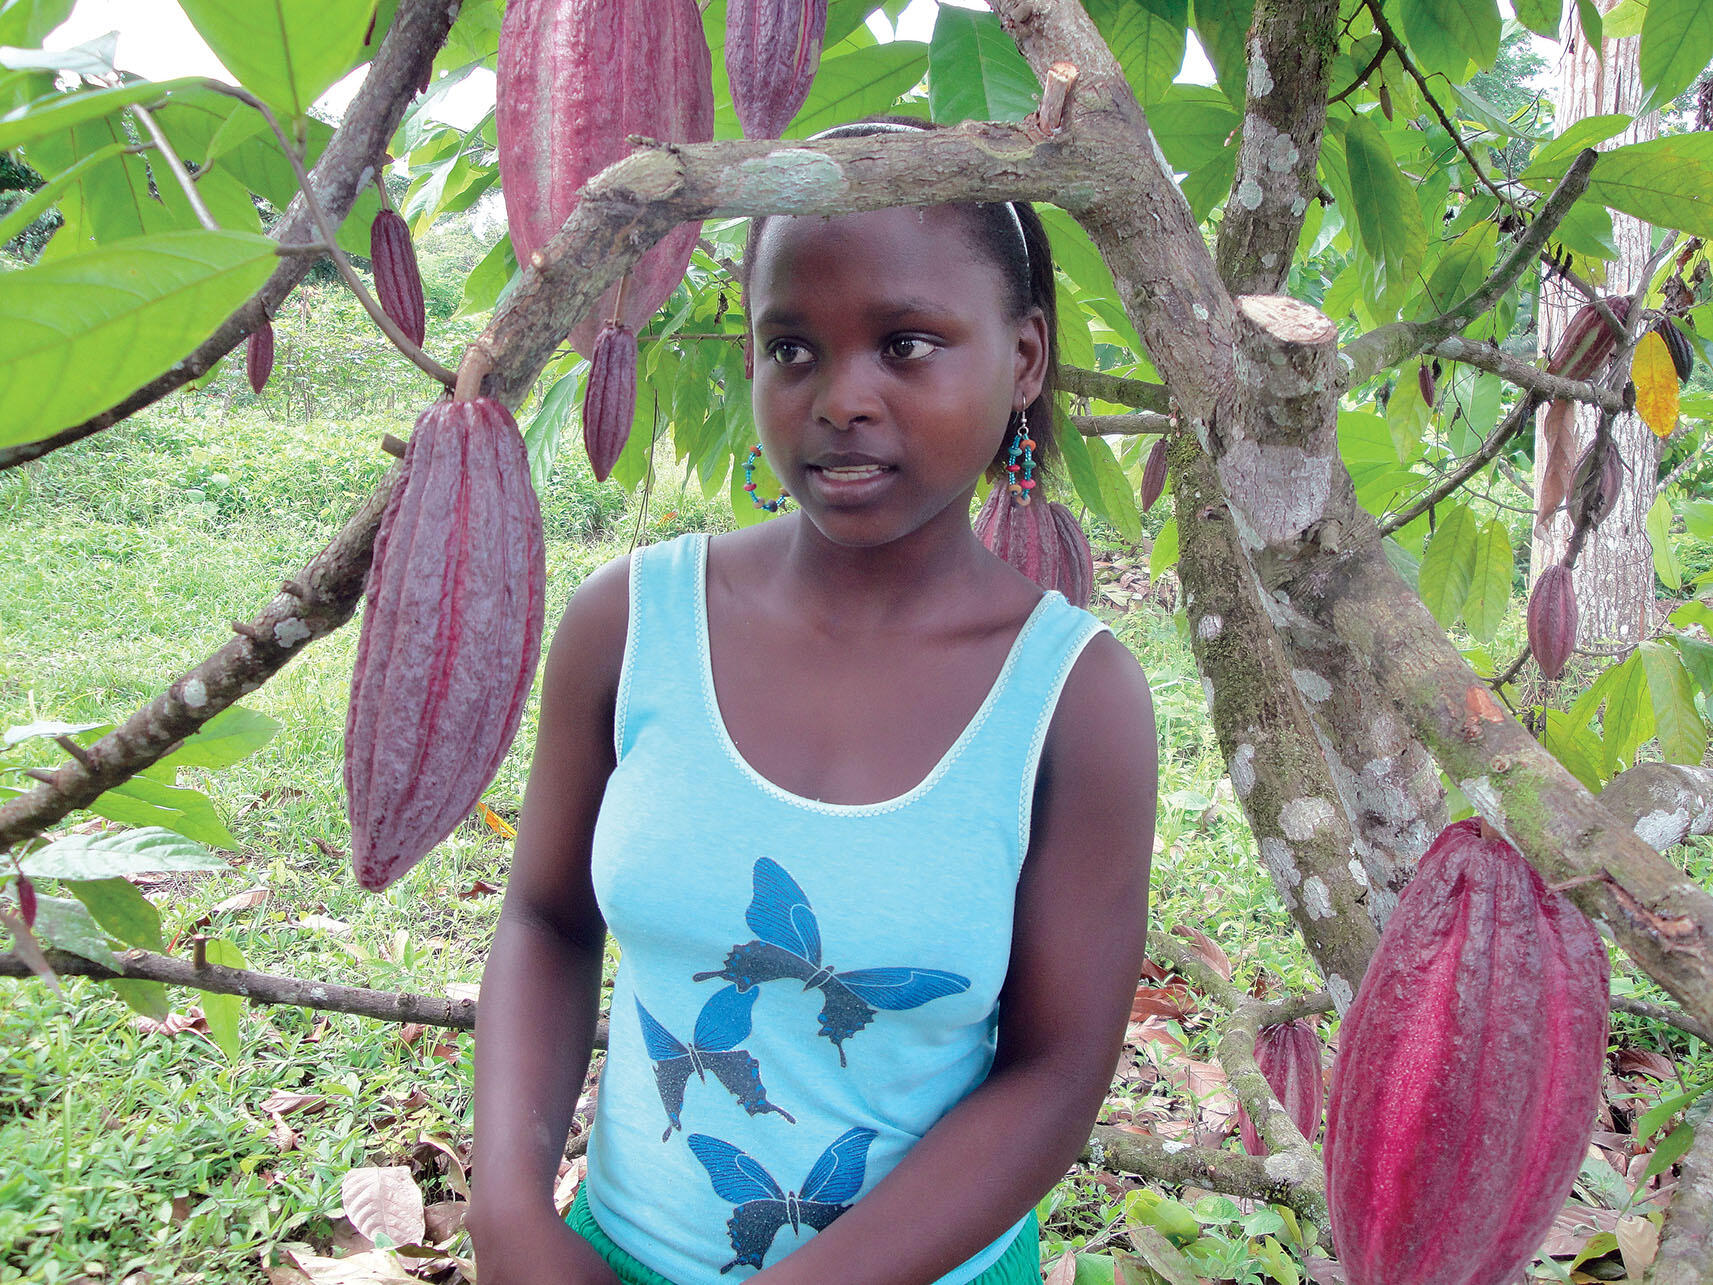 A young girl stands under trees among ripe cacao pods. (Photo by Sarah Krupp.)